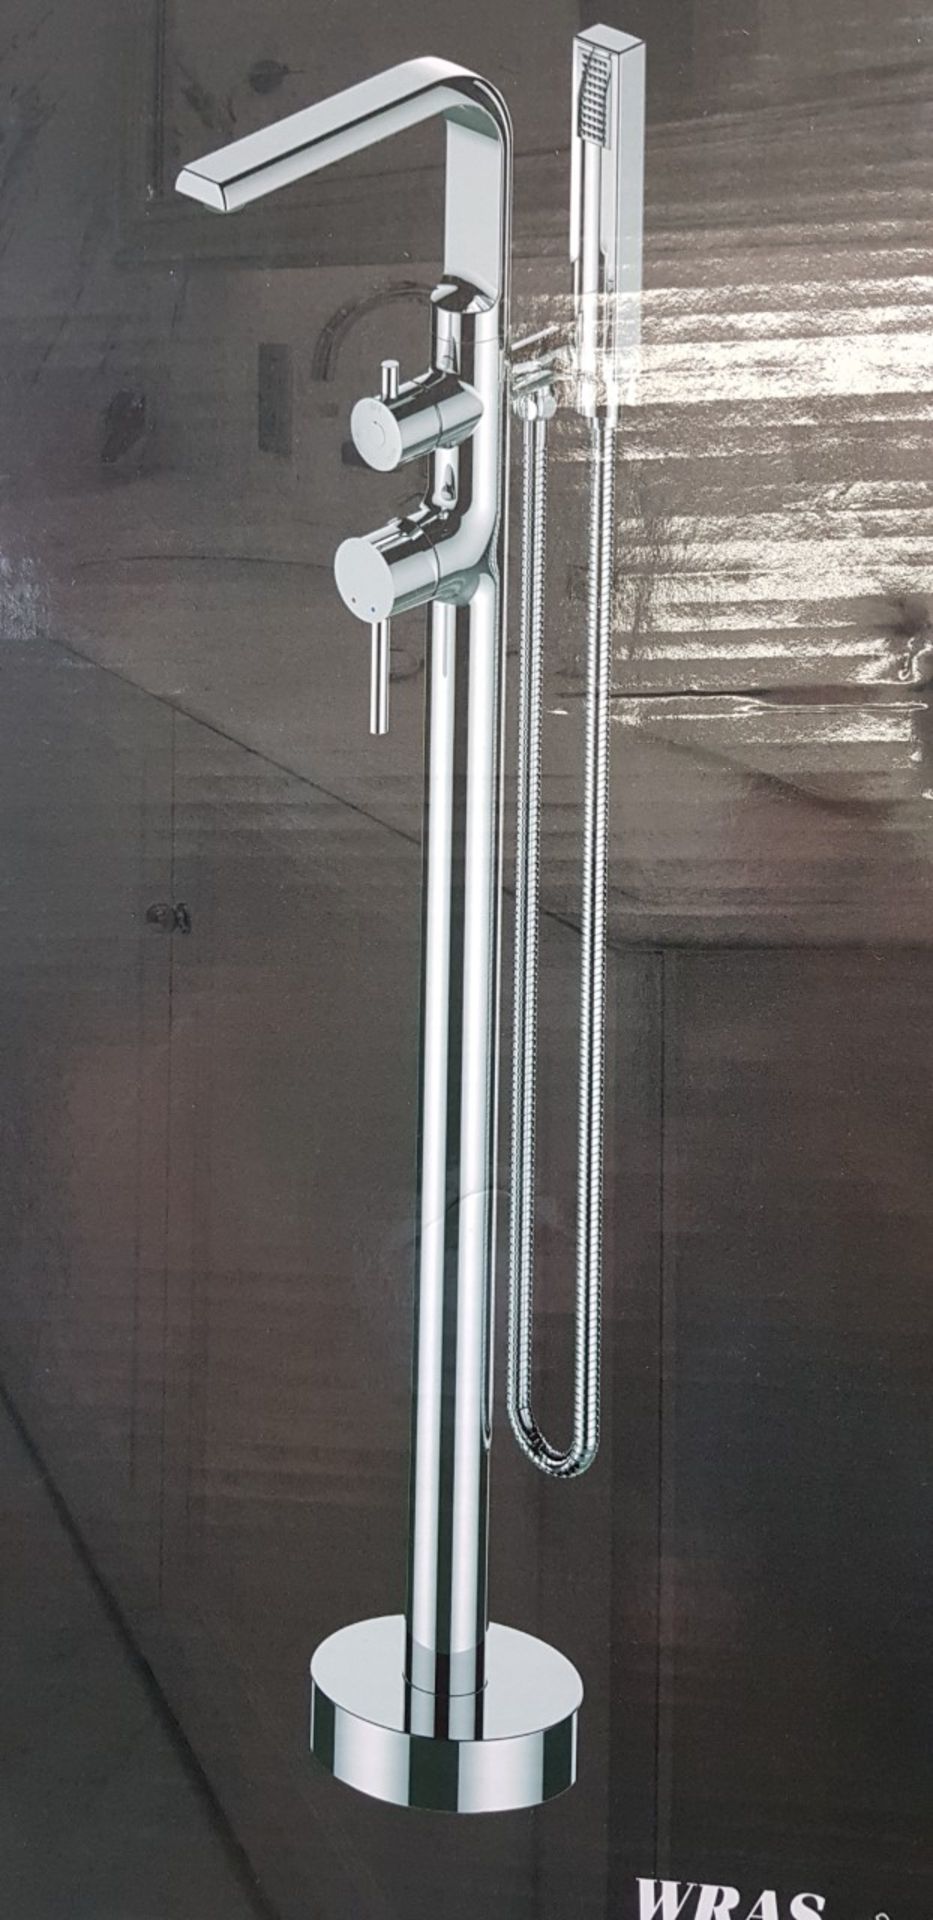 (GR222) Mondella Freestanding Shower Mixer Tap & Hand Held Shower Head. RRP £499.99. Crafted from